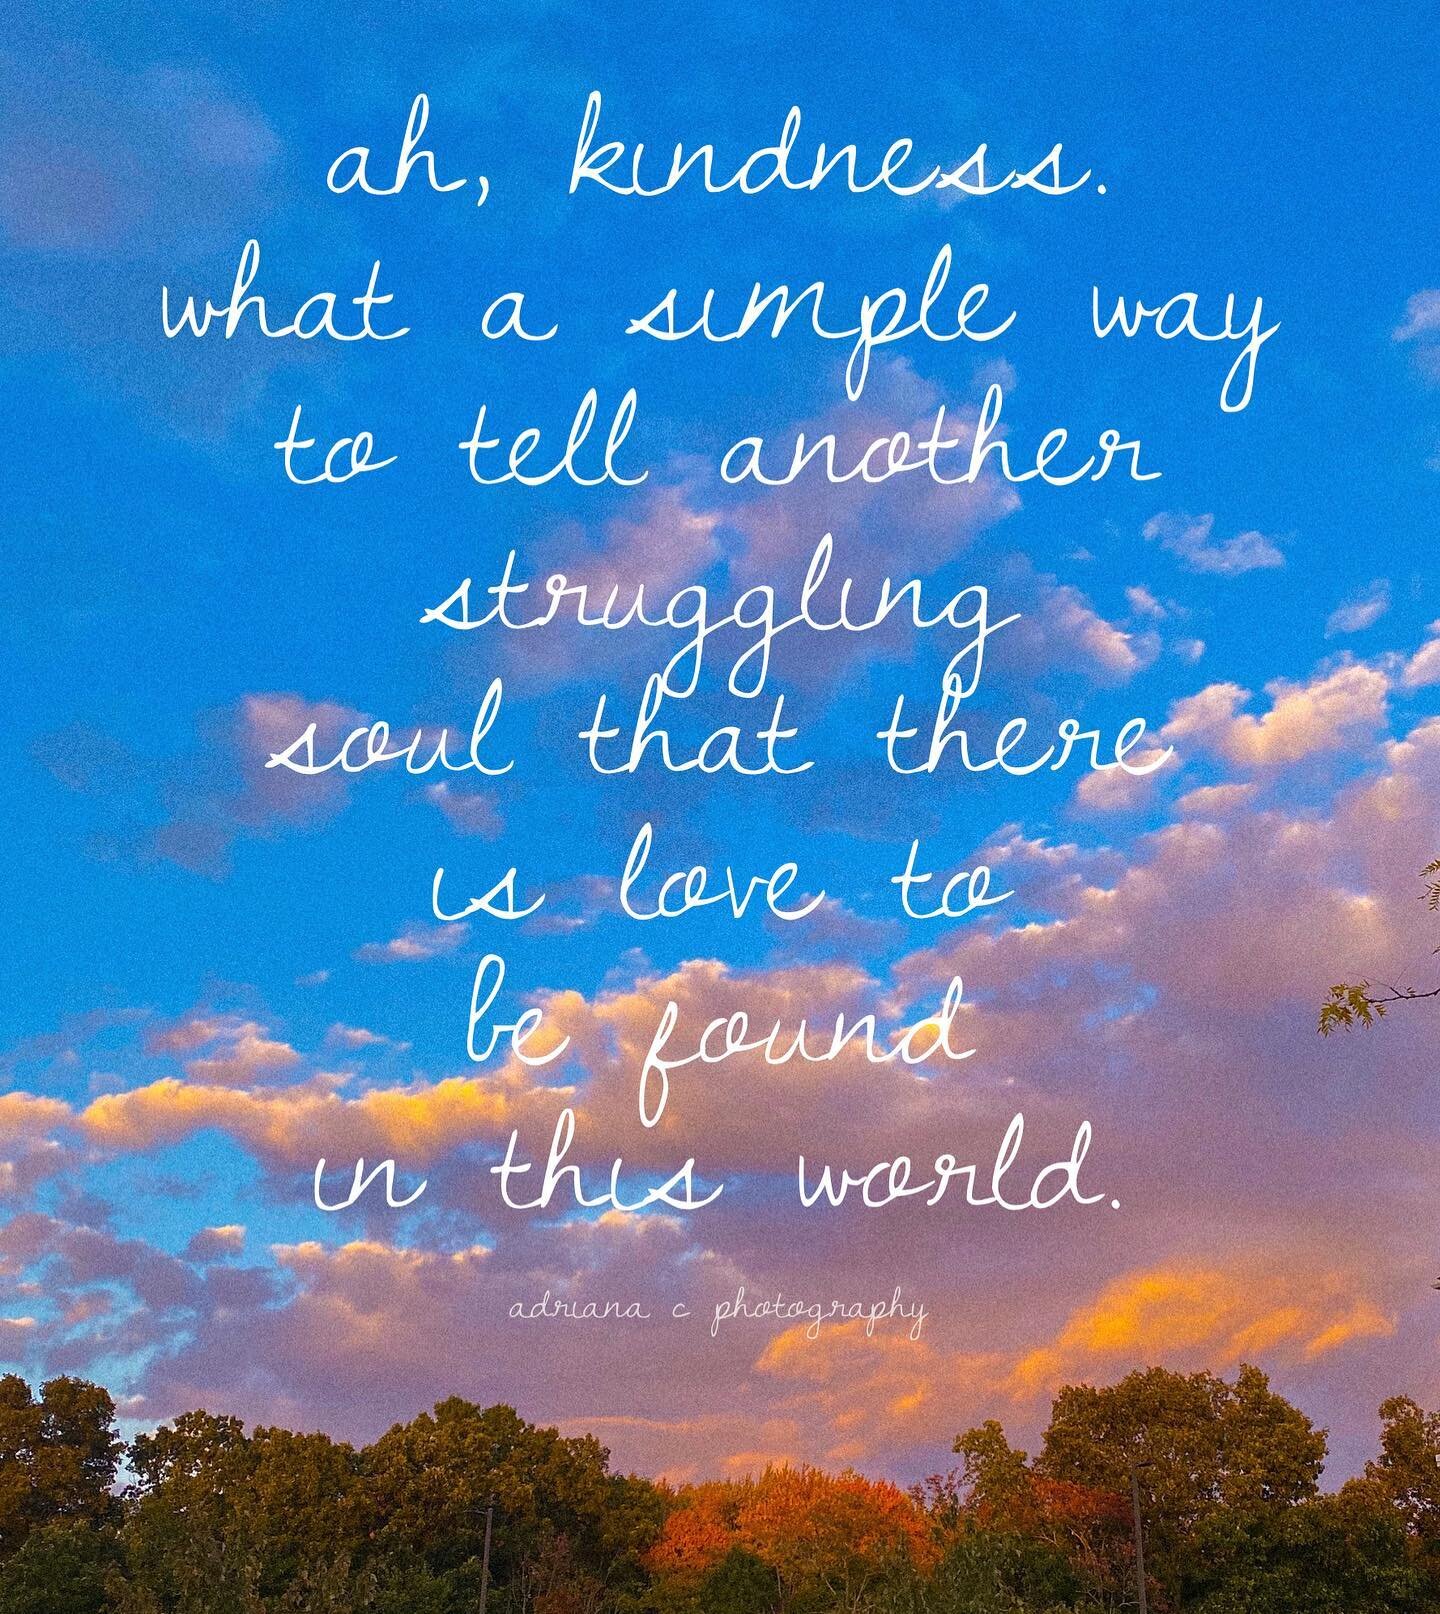 &ldquo;Ah, kindness. What a simple way to tell another struggling soul that there is love to be found in this world.&rdquo; 💞